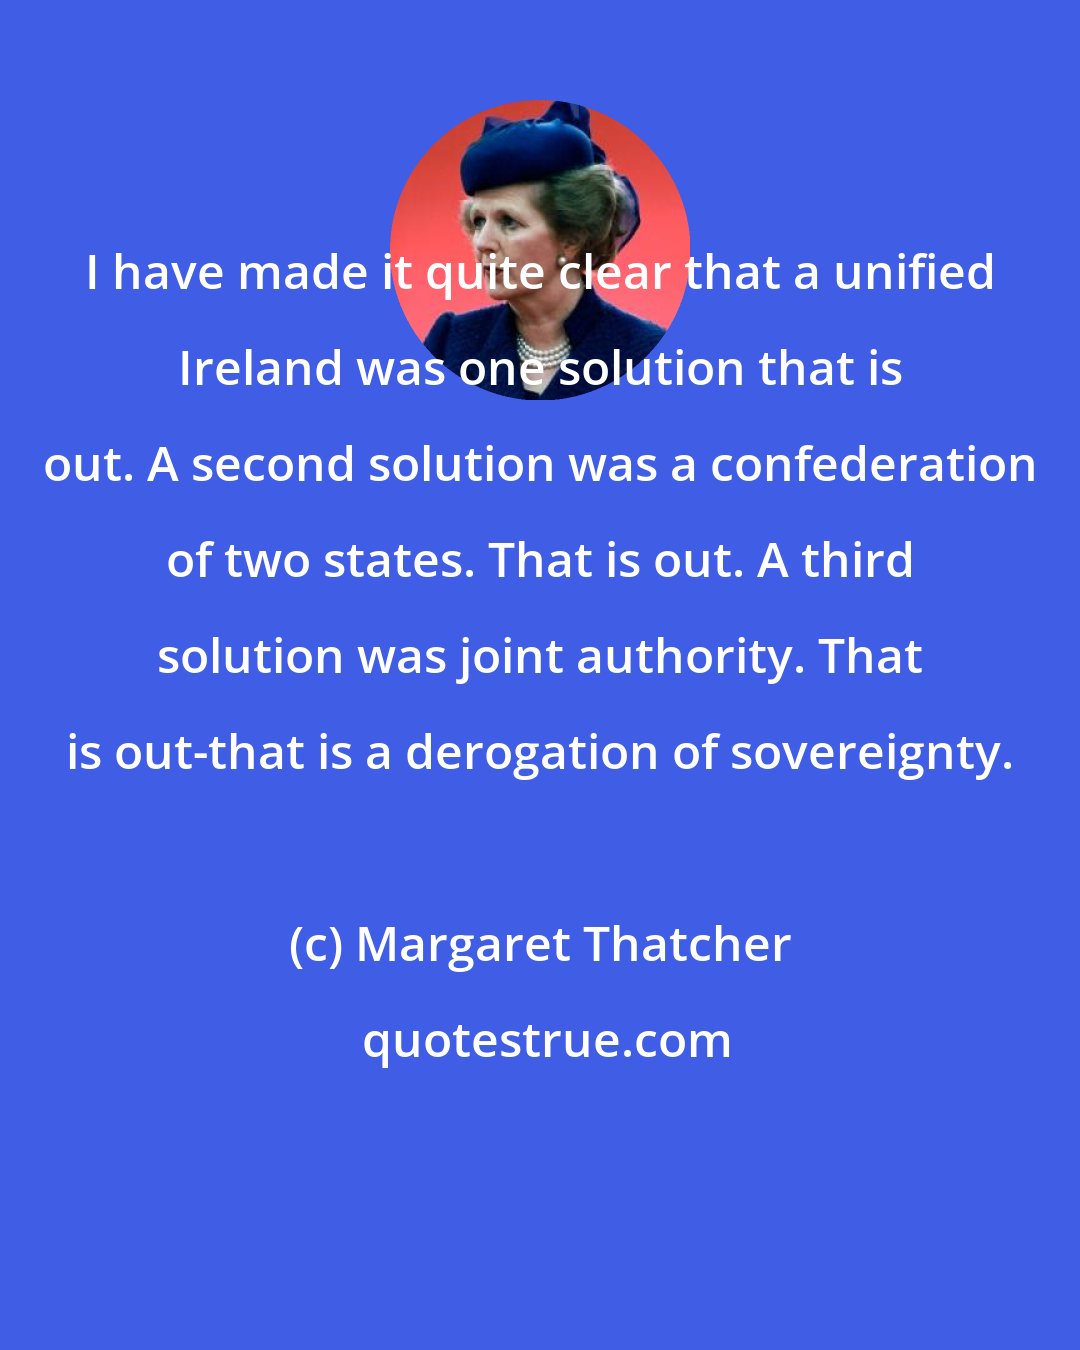 Margaret Thatcher: I have made it quite clear that a unified Ireland was one solution that is out. A second solution was a confederation of two states. That is out. A third solution was joint authority. That is out-that is a derogation of sovereignty.